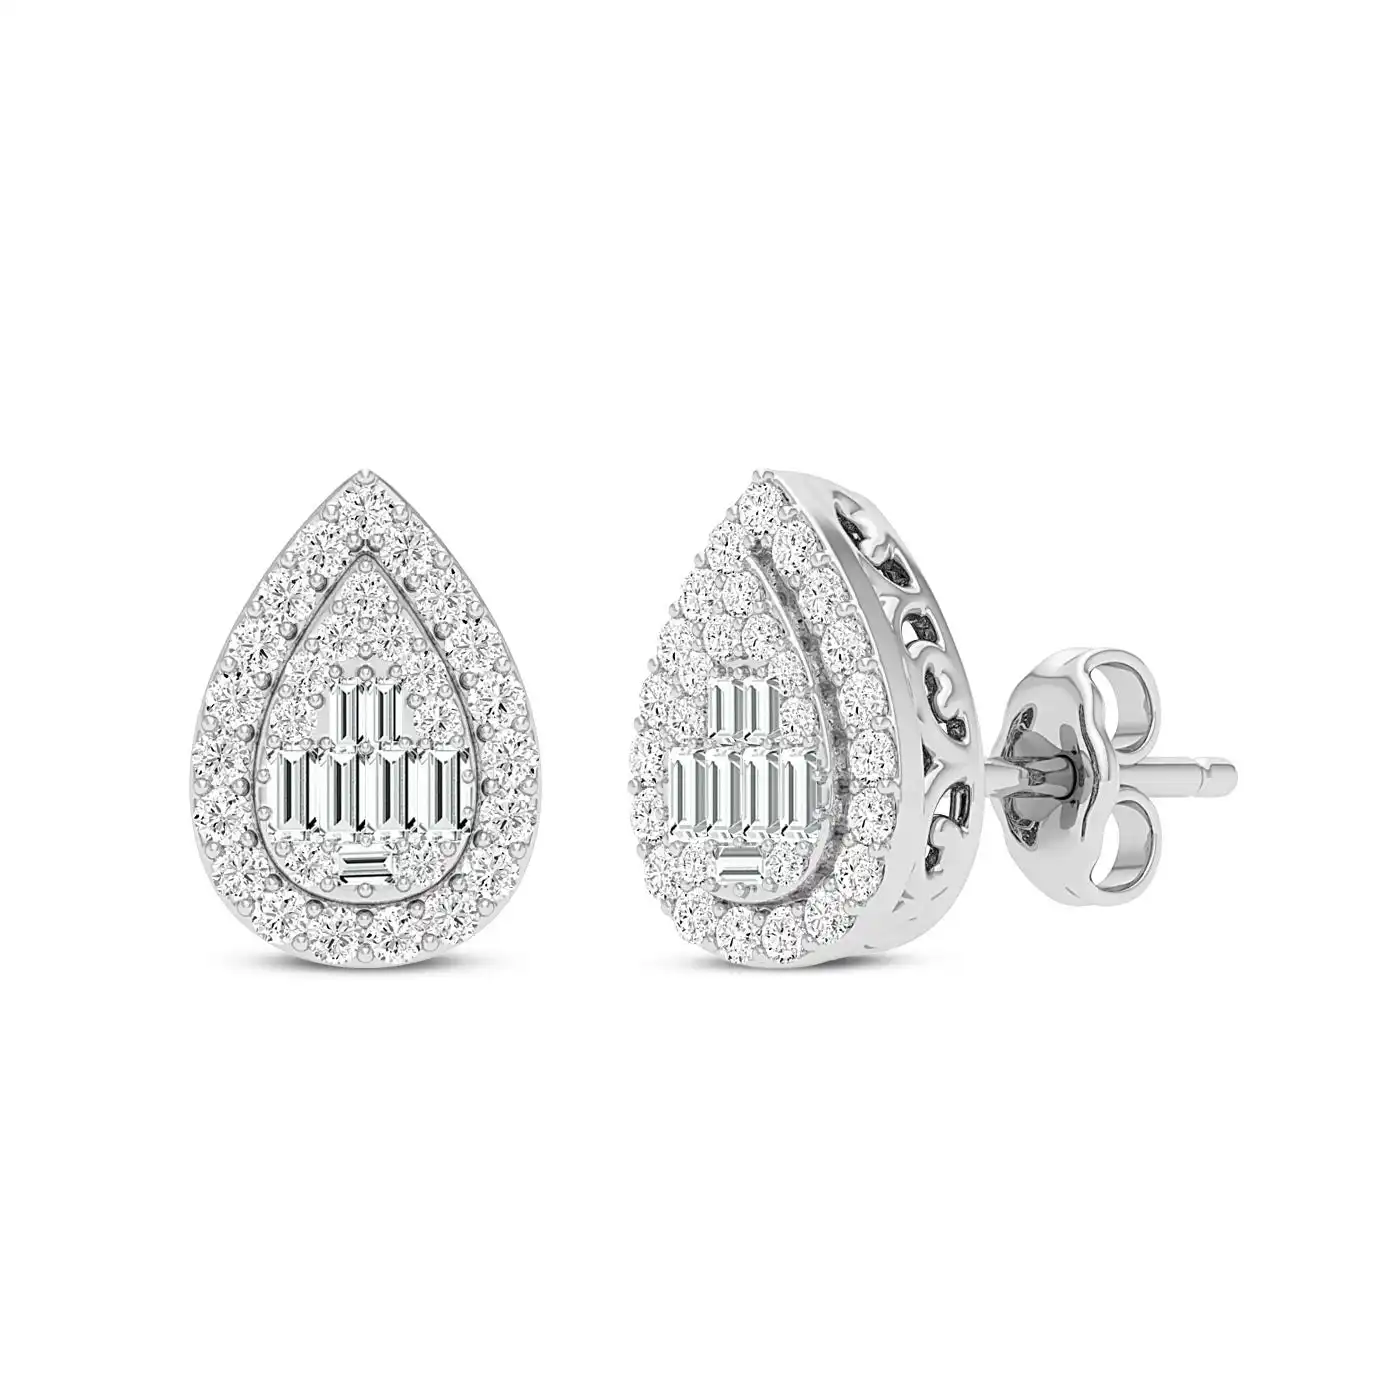 Pear Baguette Halo Earrings with 1/2ct of Diamonds in 9ct White Gold